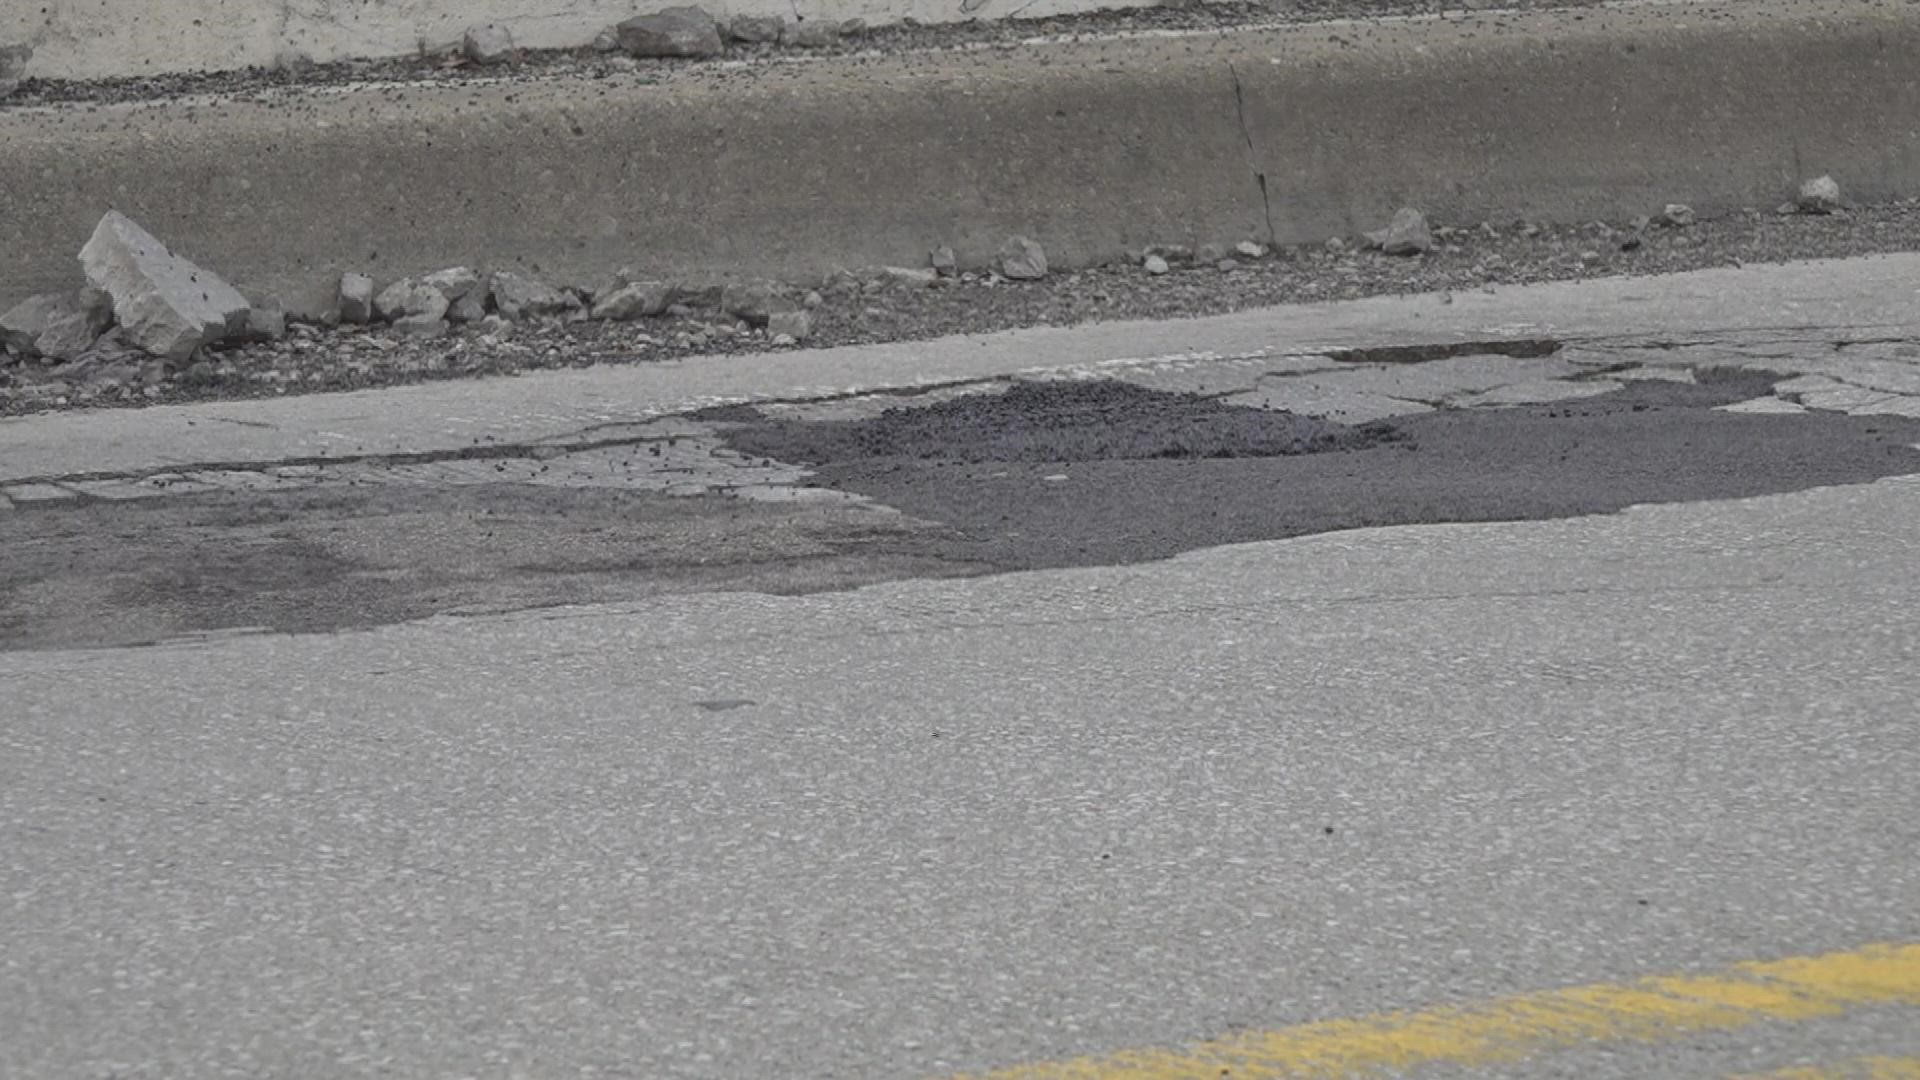 It's pothole season in Ohio. Here's how you can get money from the state caused by potholes.